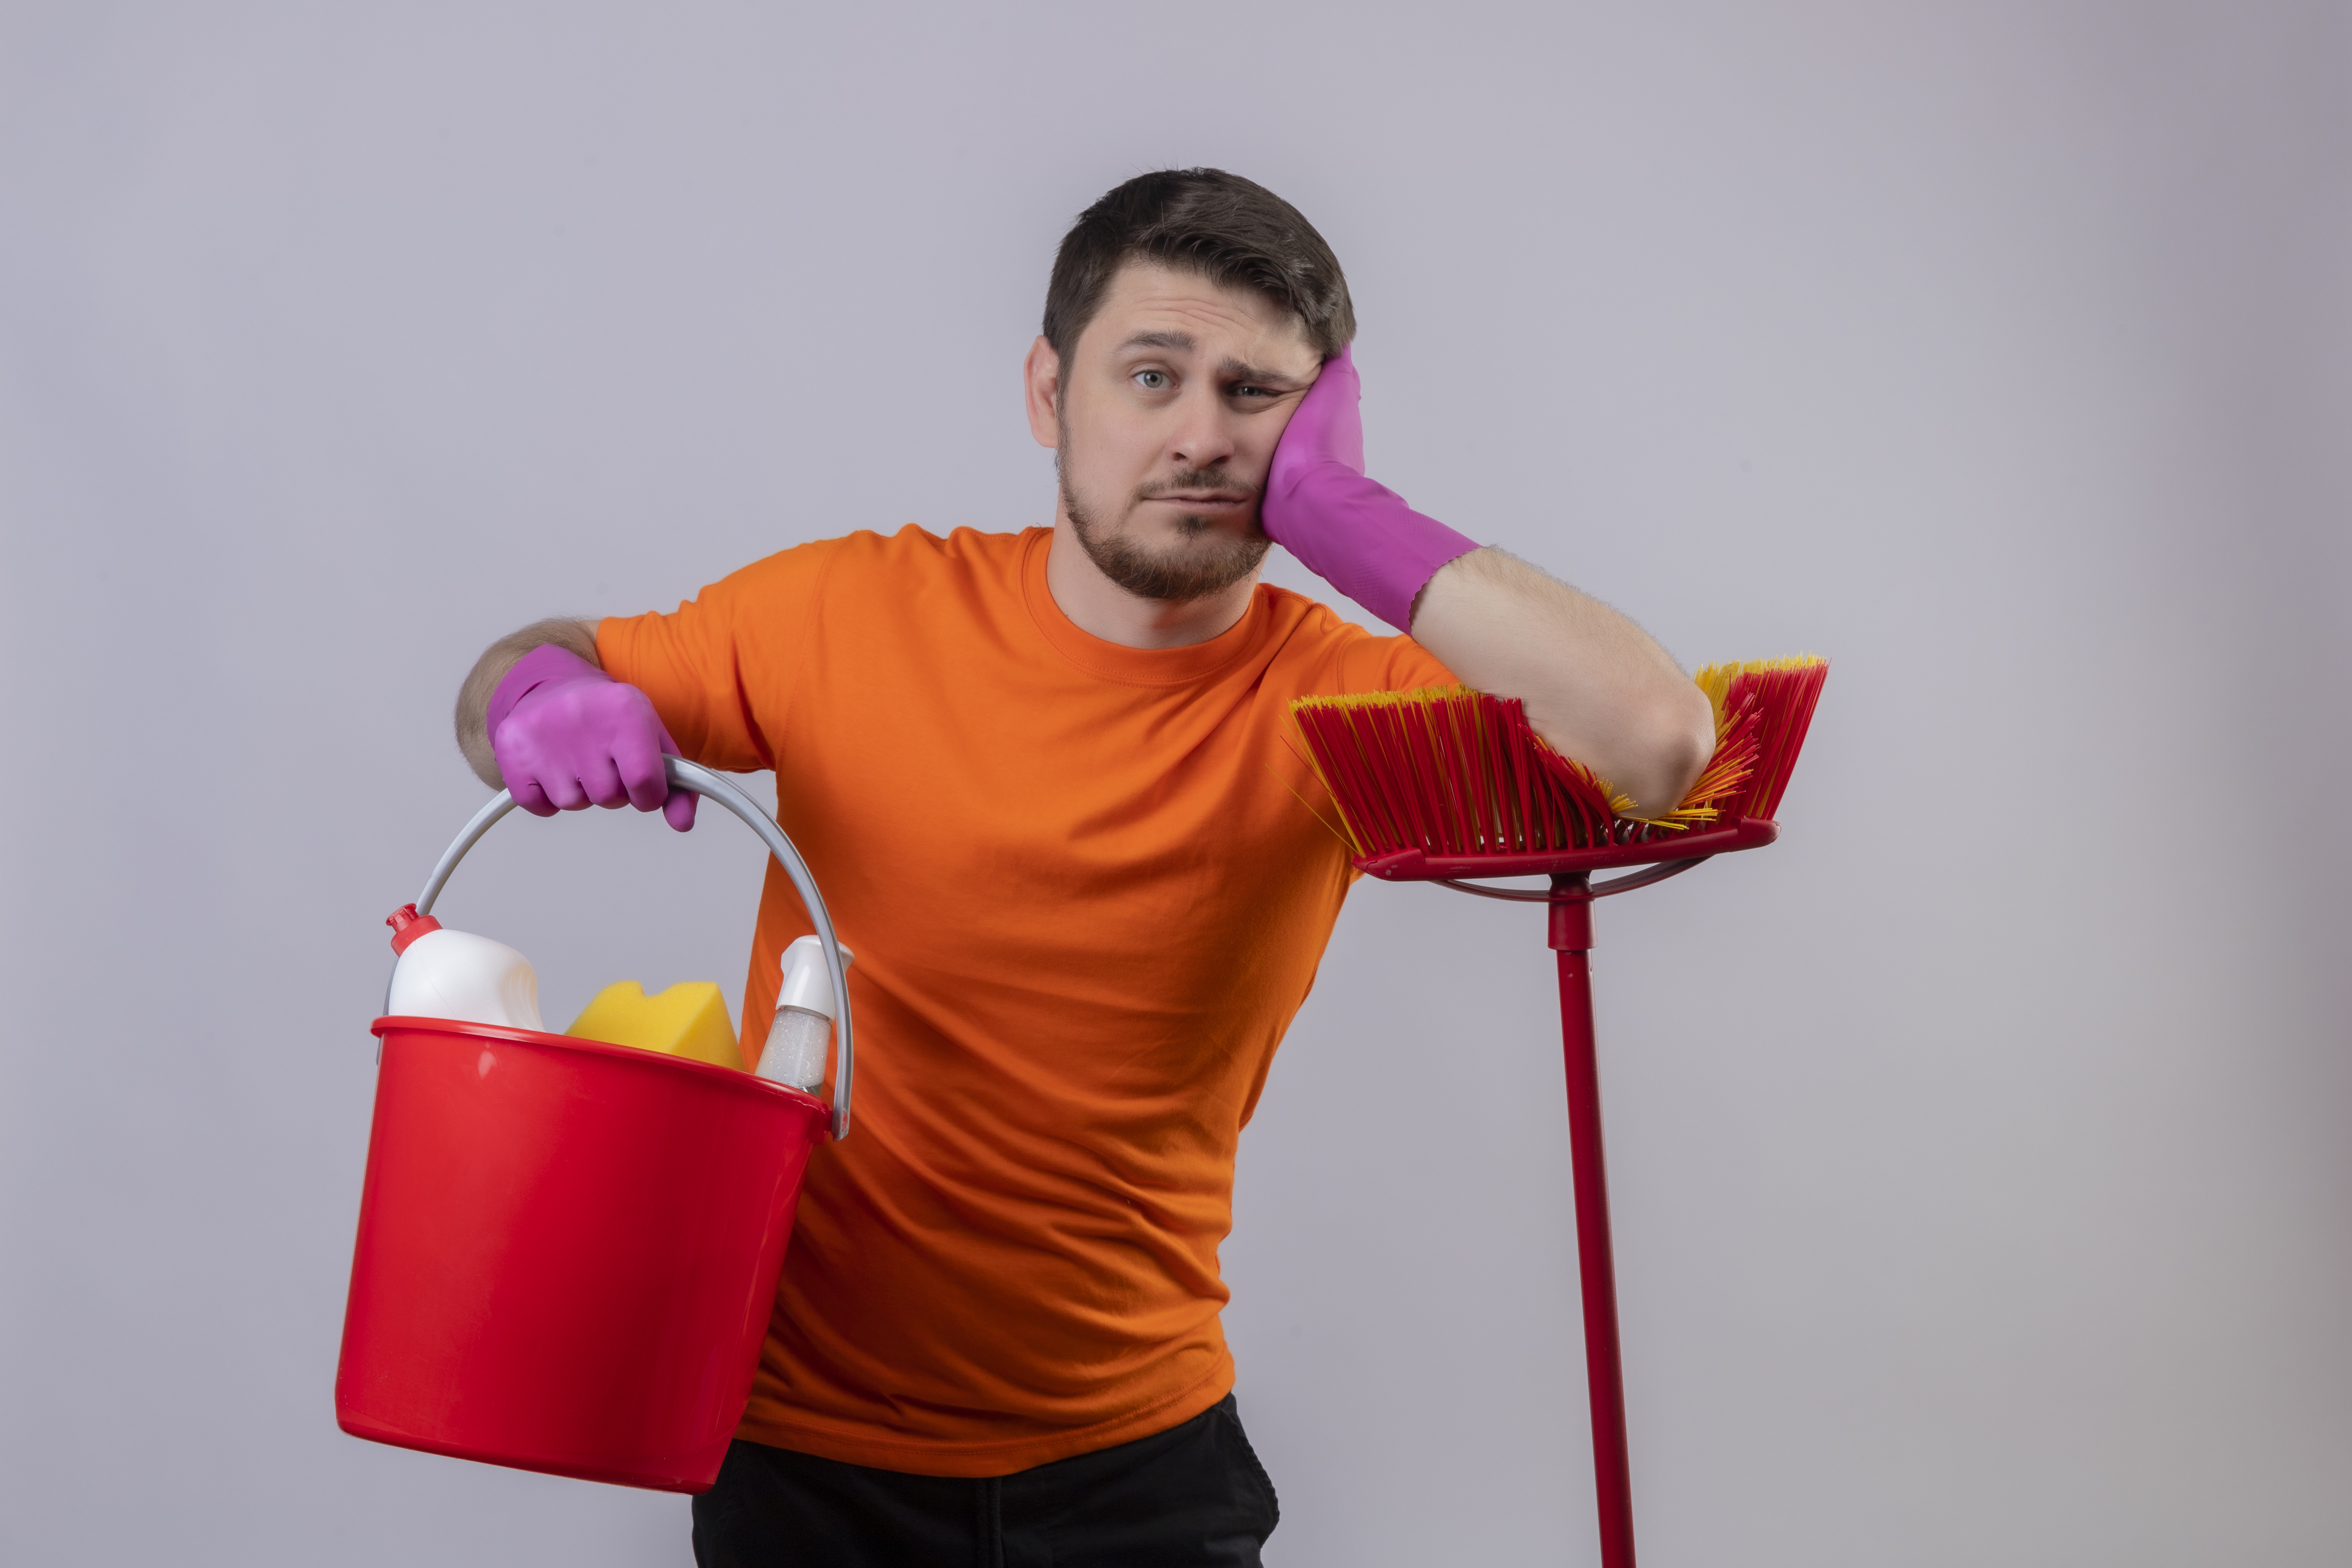 Young man in orange holding a bucket with cleaning tools and leaning on a mop | Source: stockking on Freepik